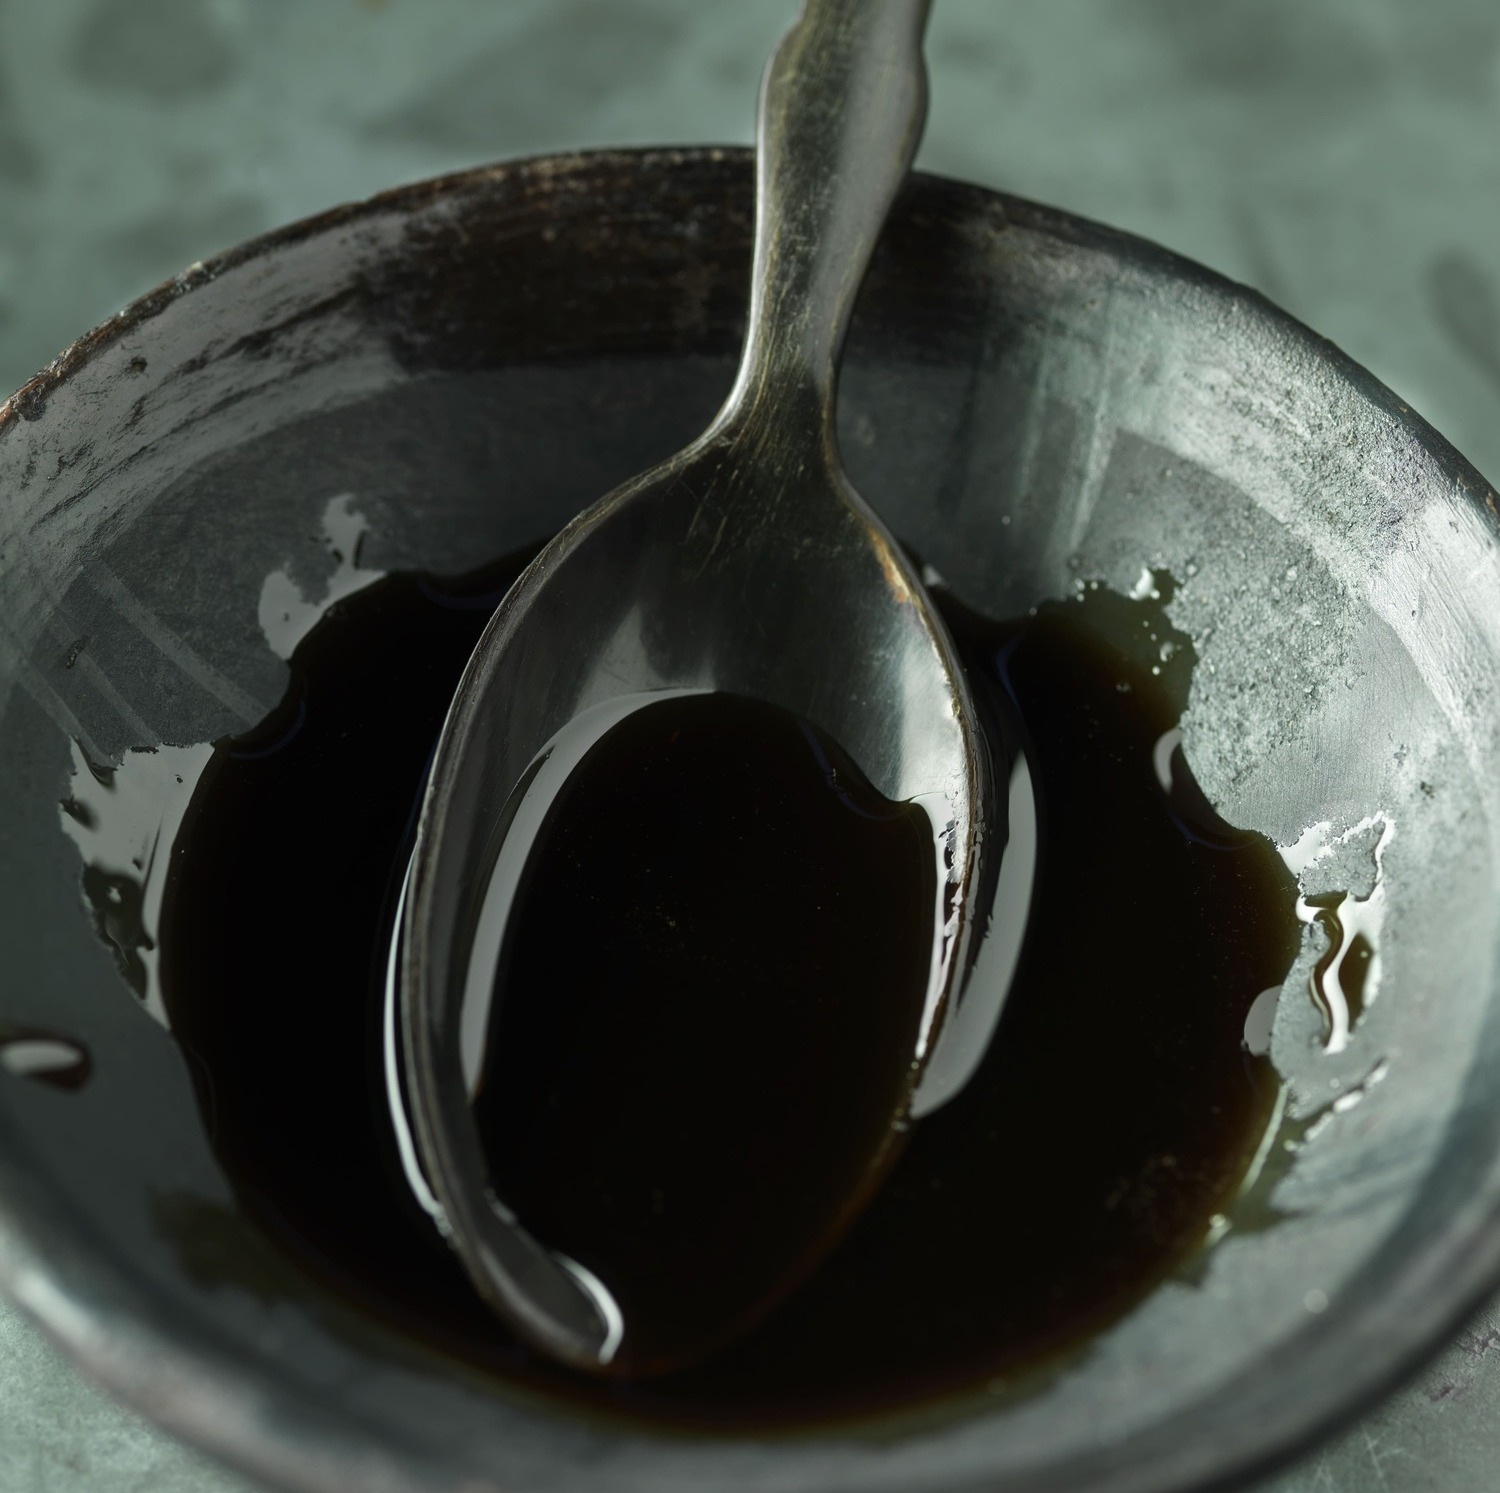 pomegranate-molasses-in-bowl-with-spoon-close-up-2022-03-08-00-13-39-utc-1-1-1.jpg